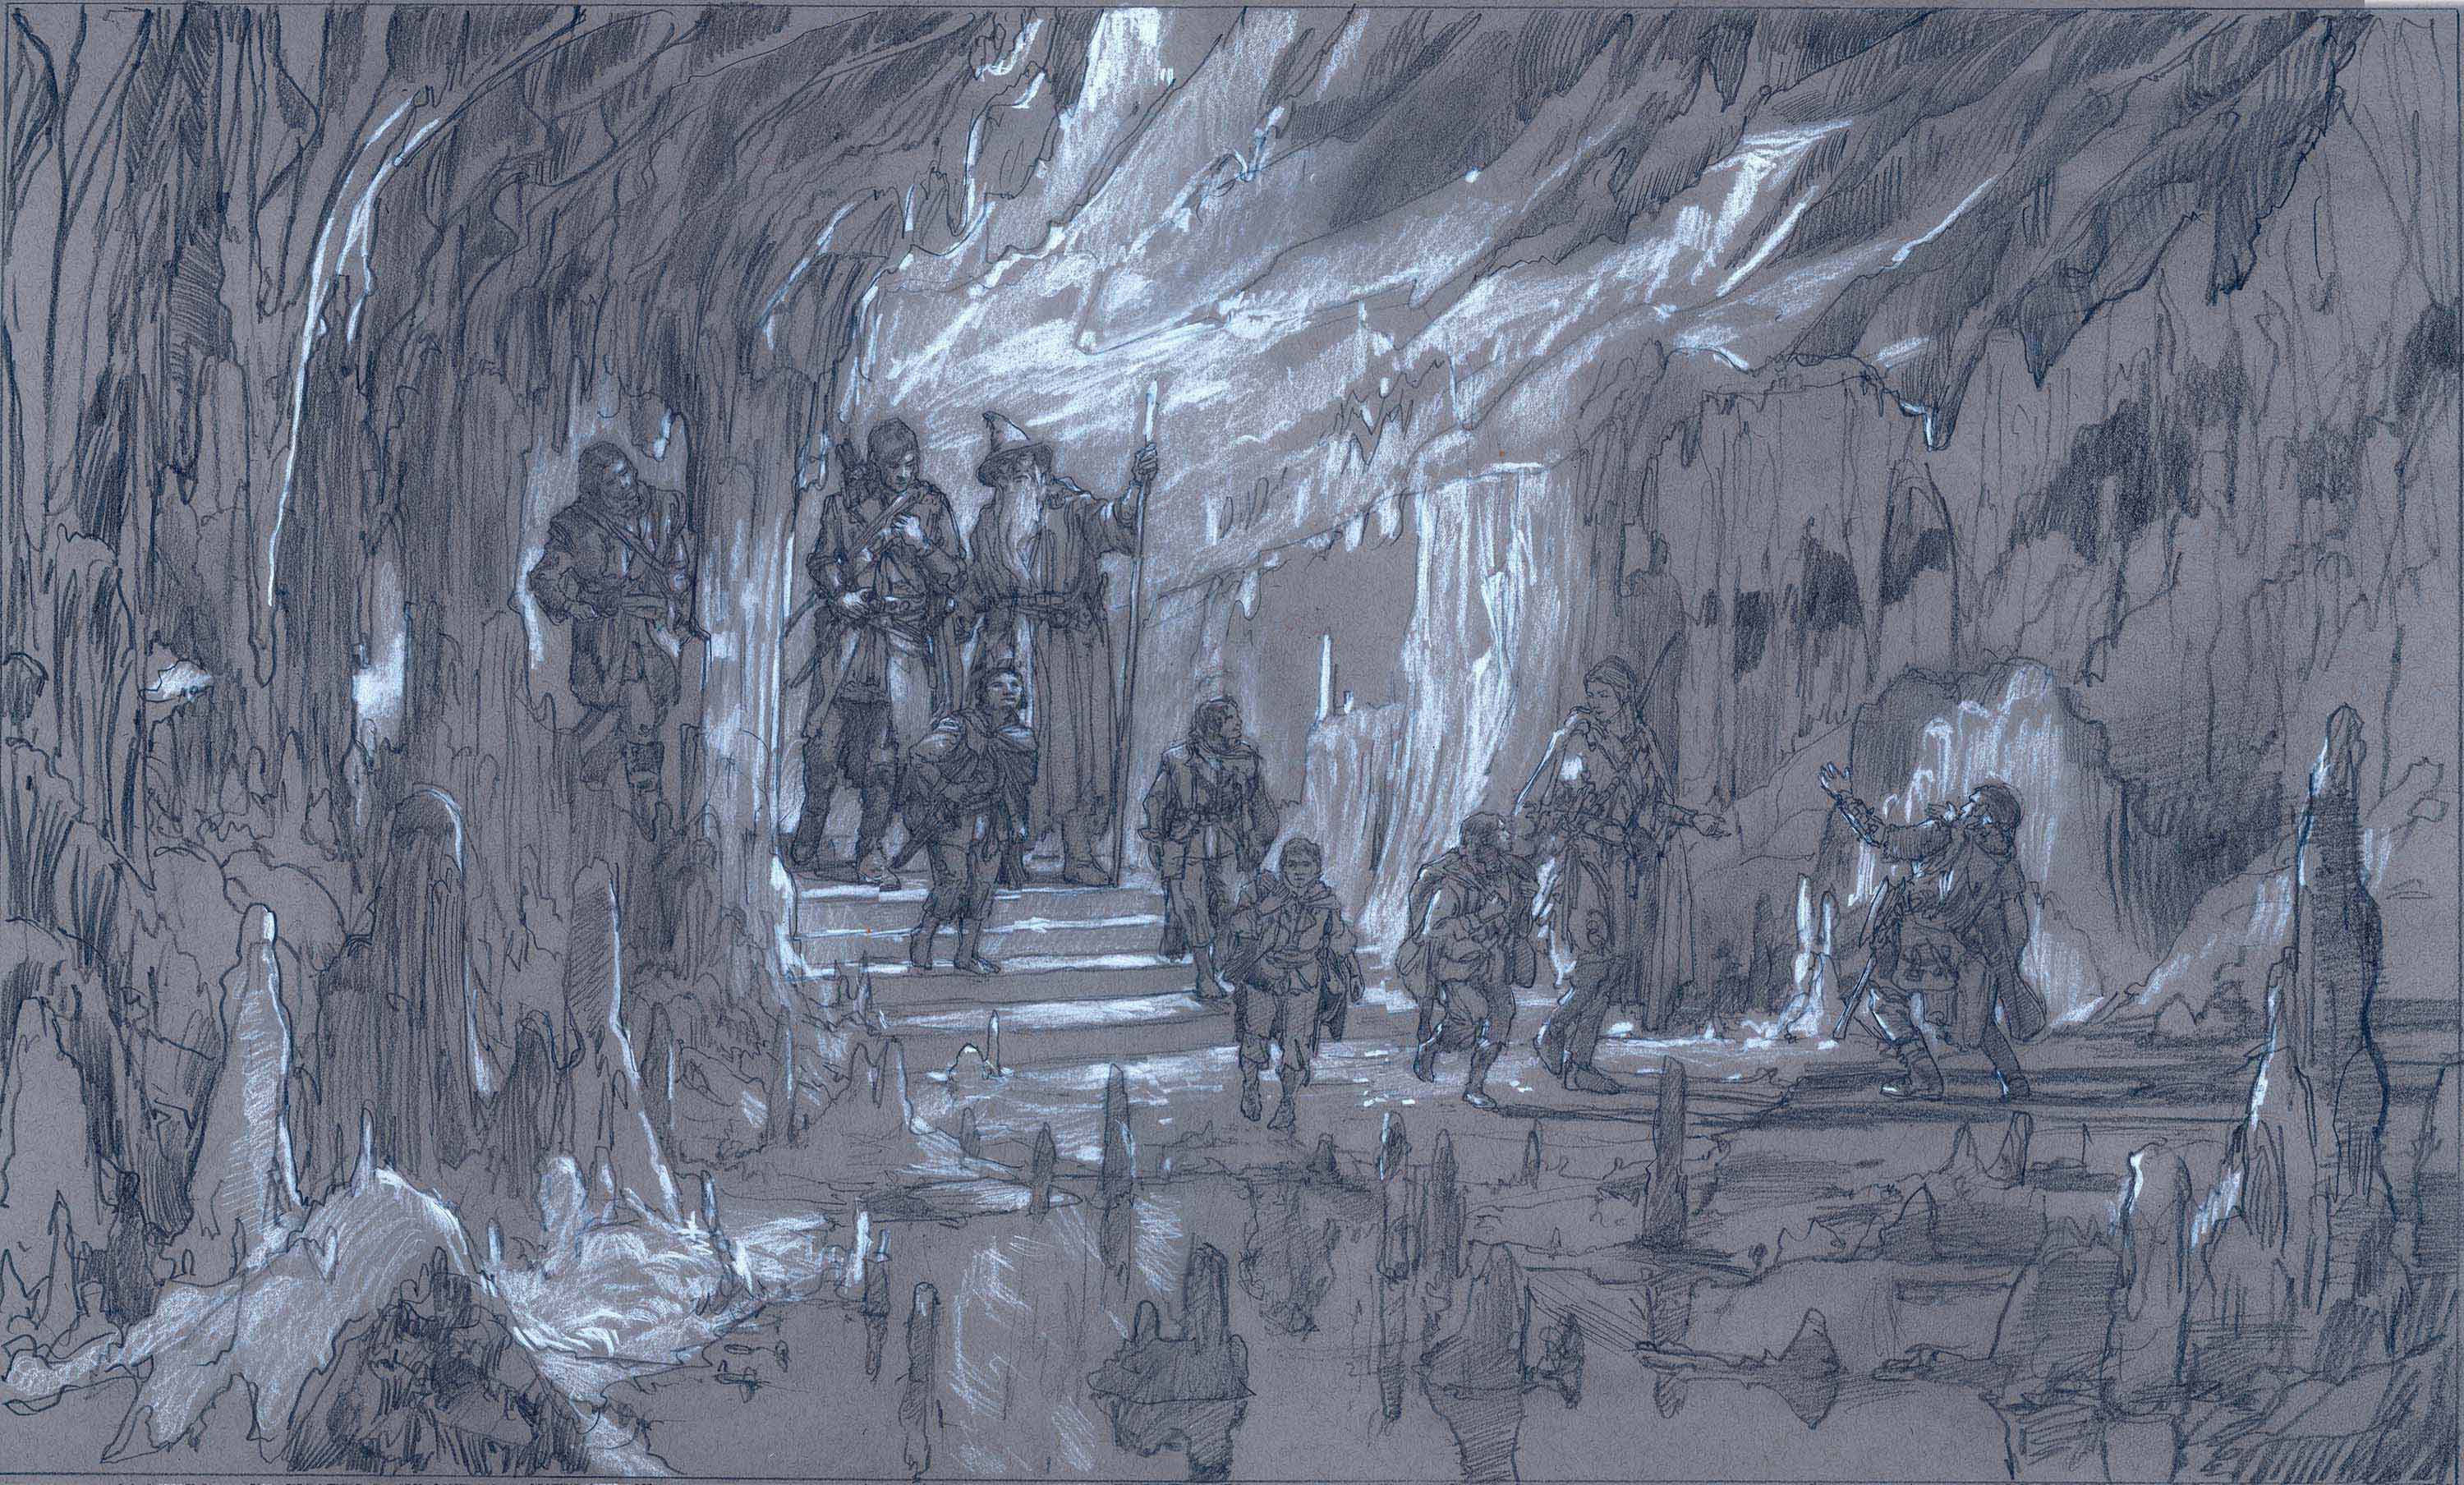 The Fellowship of the Ring in Moria
Preliminary Drawing 
18" x 24"  Graphite and Chalk on Toned Paper
private collection
